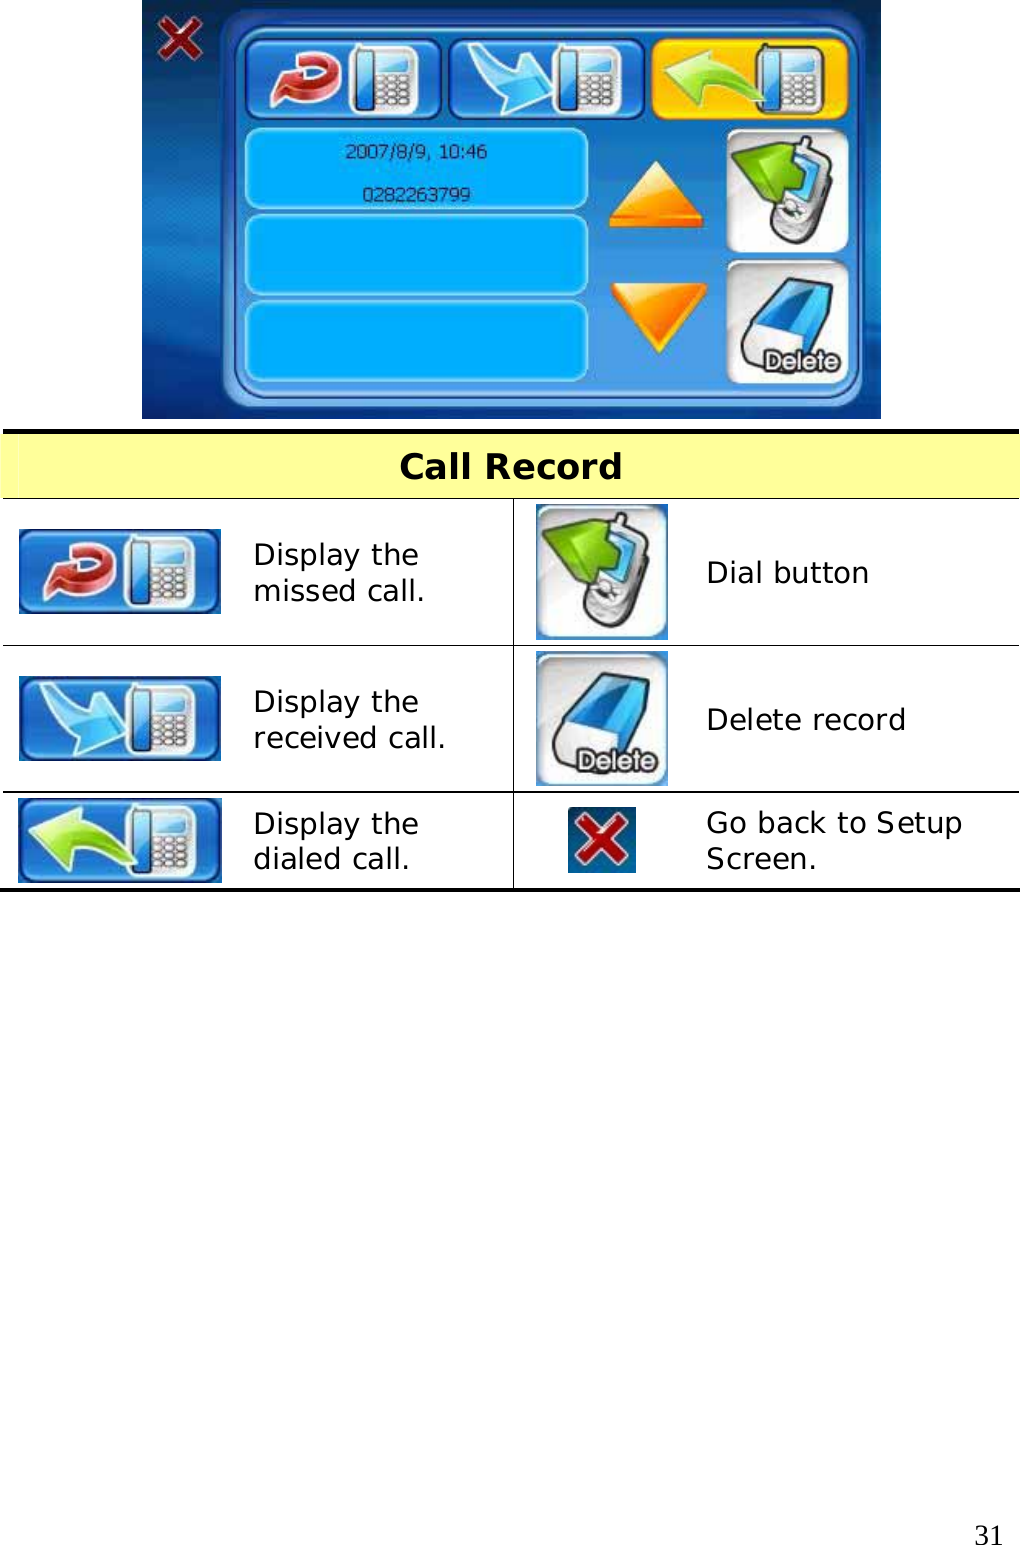  31  Call Record  Display the missed call.  Dial button  Display the received call.  Delete record  Display the dialed call.   Go back to Setup Screen.  